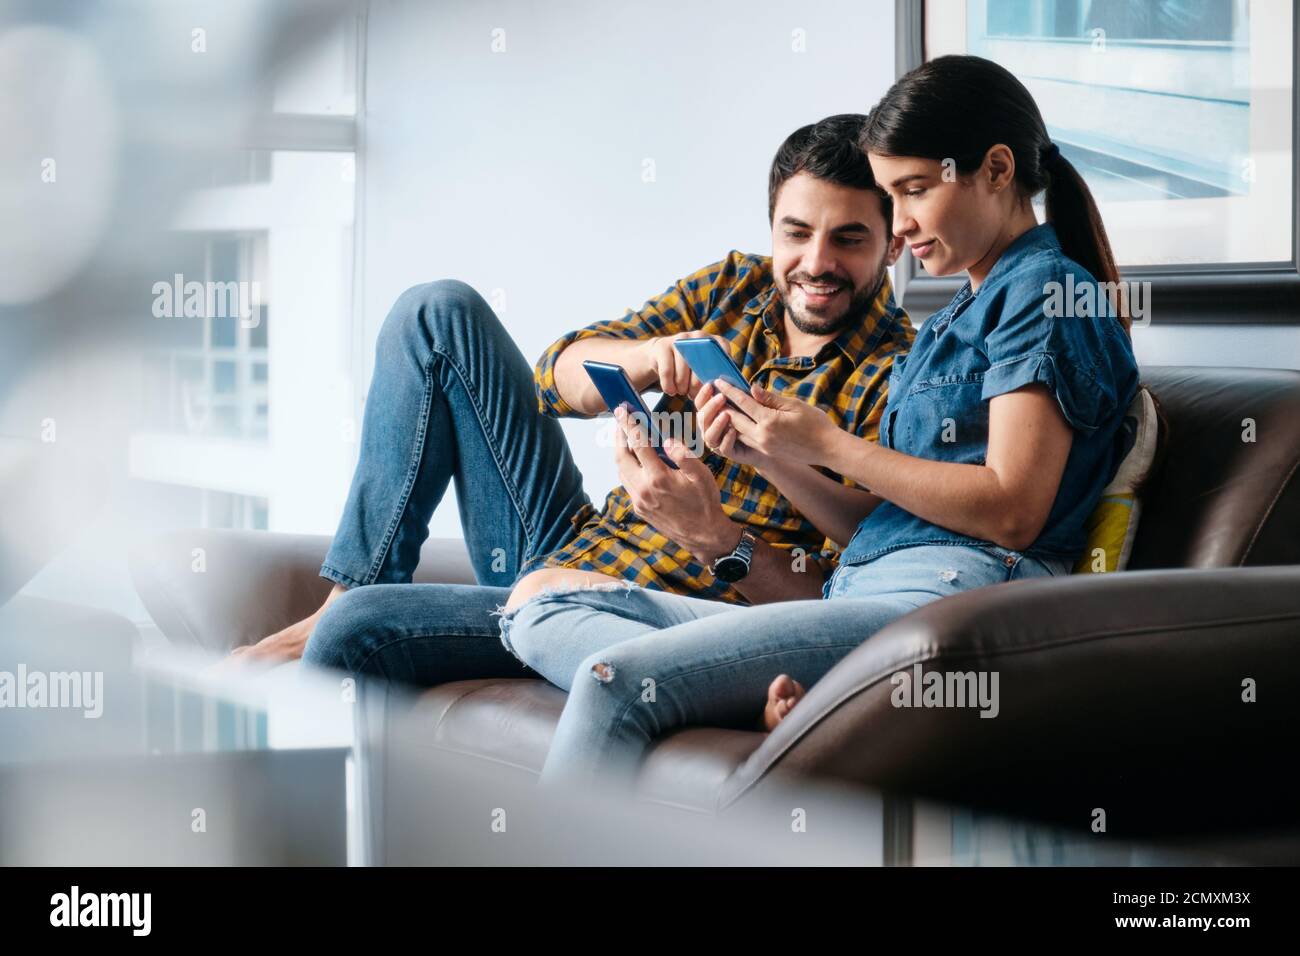 Man Teaching Phone App Technology To Girlfriend With Smartphone Stock Photo